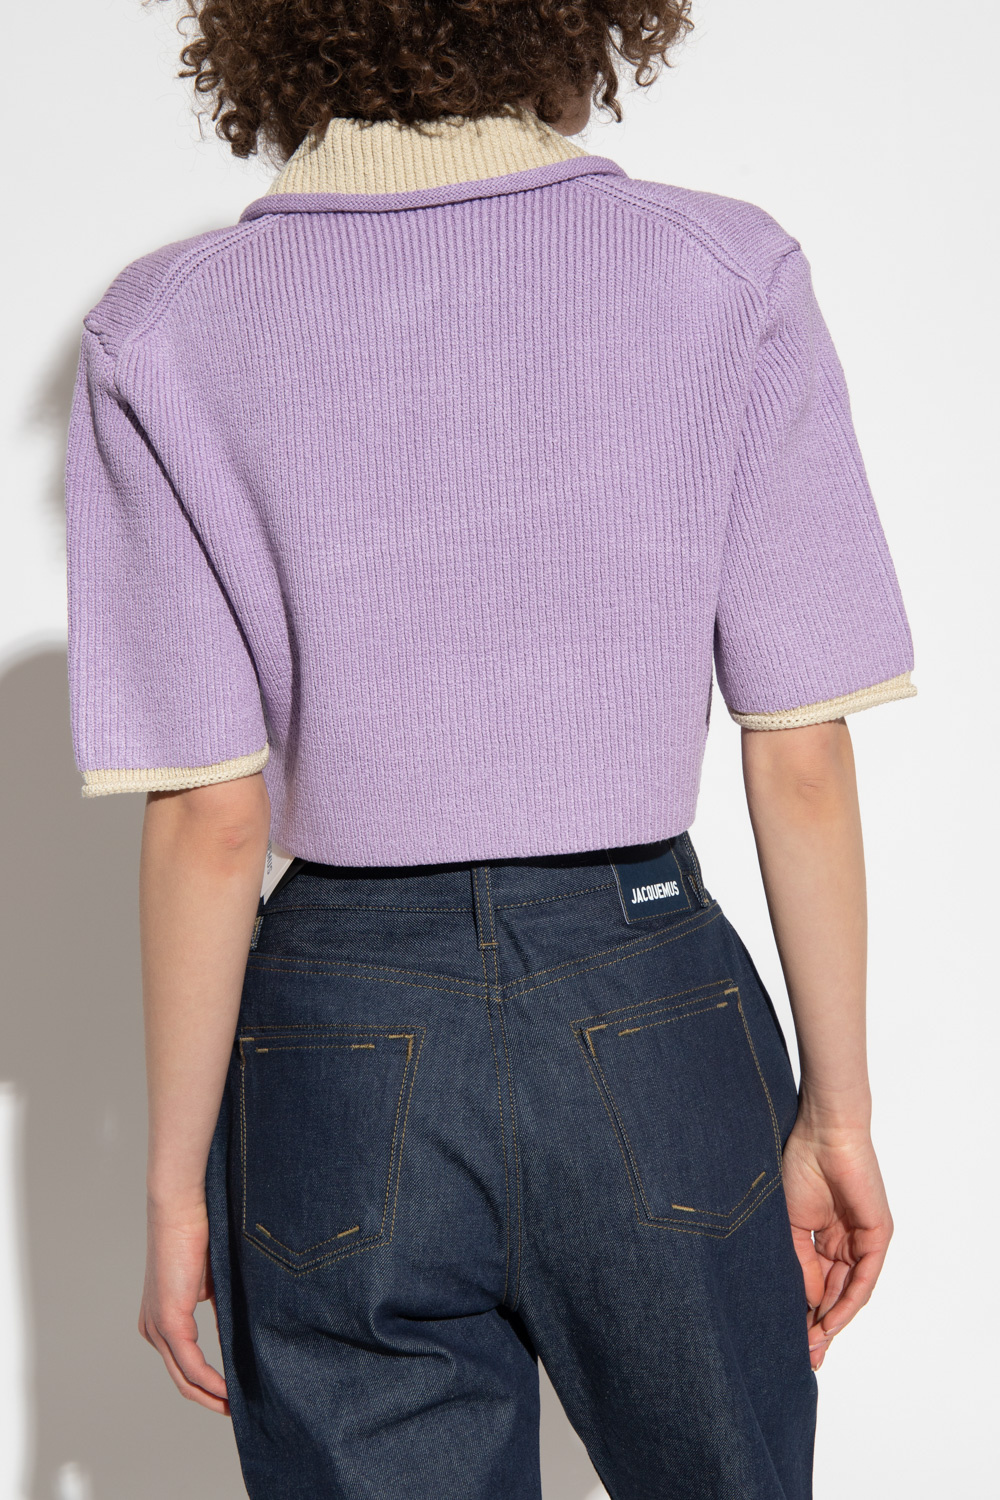 Jacquemus ‘Arco’ cropped Windrunner sweater